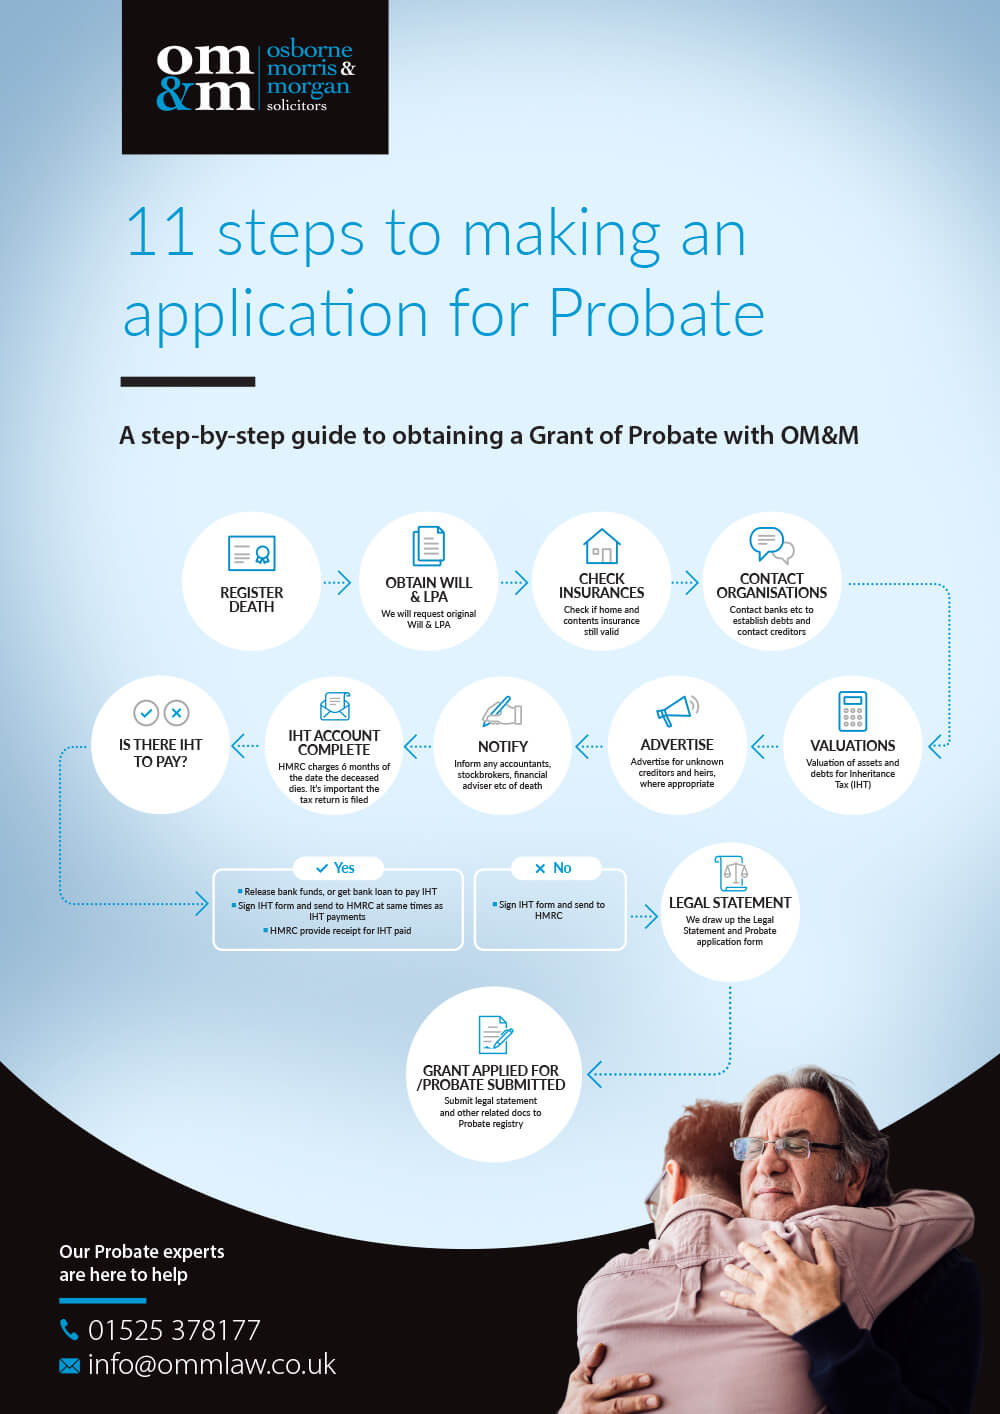 11 steps to making an application for Probate